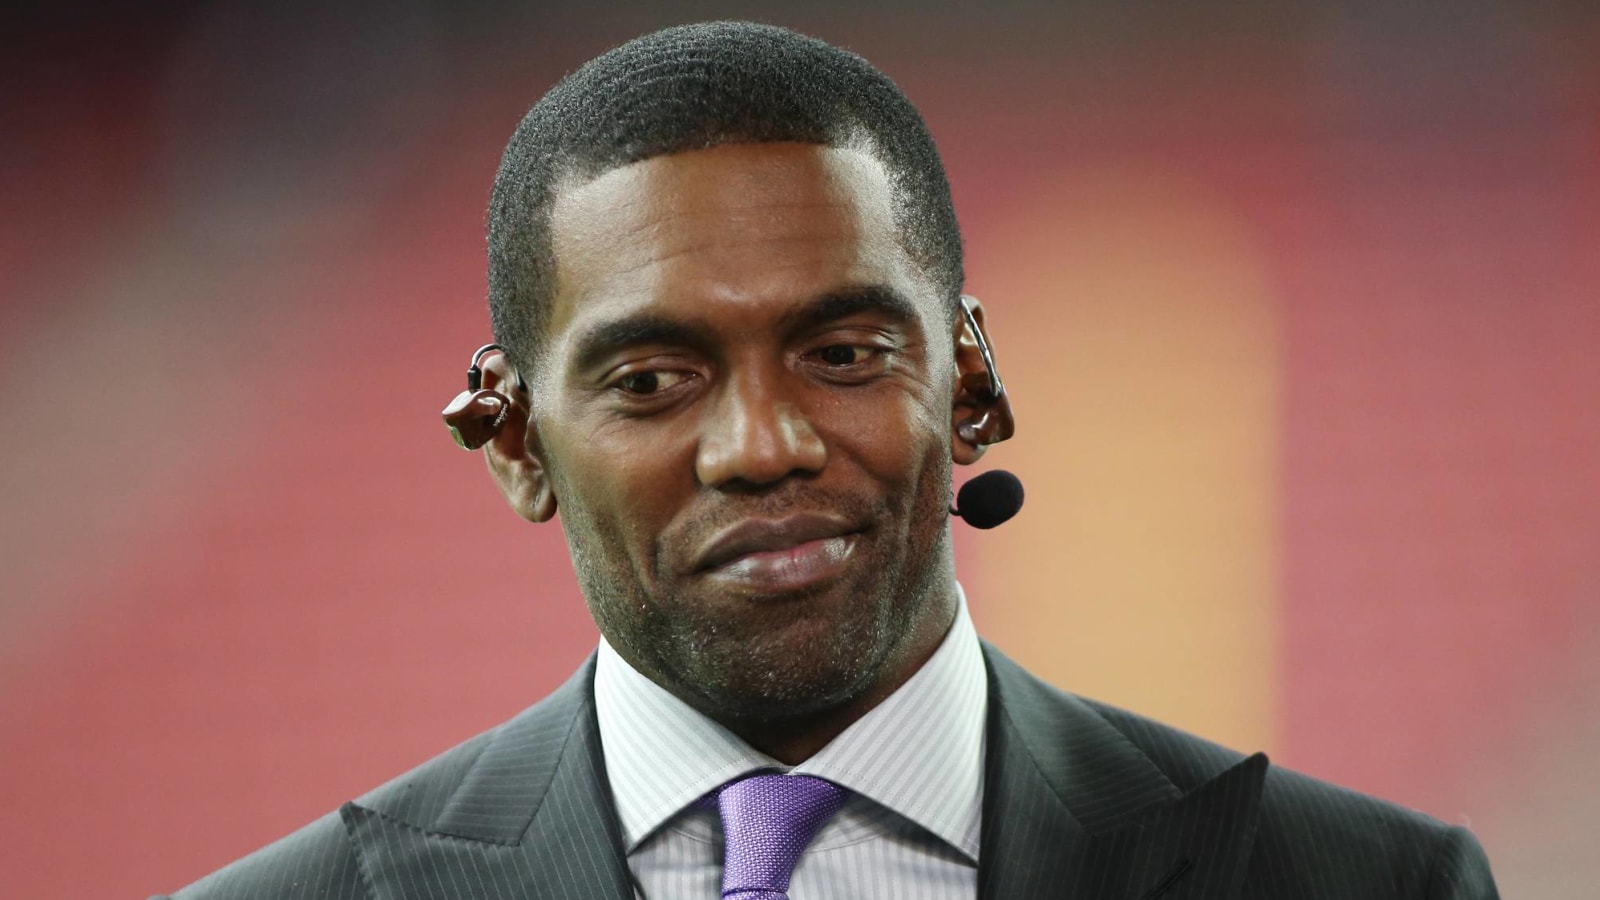 Randy Moss shares full story that led to infamous fake moon